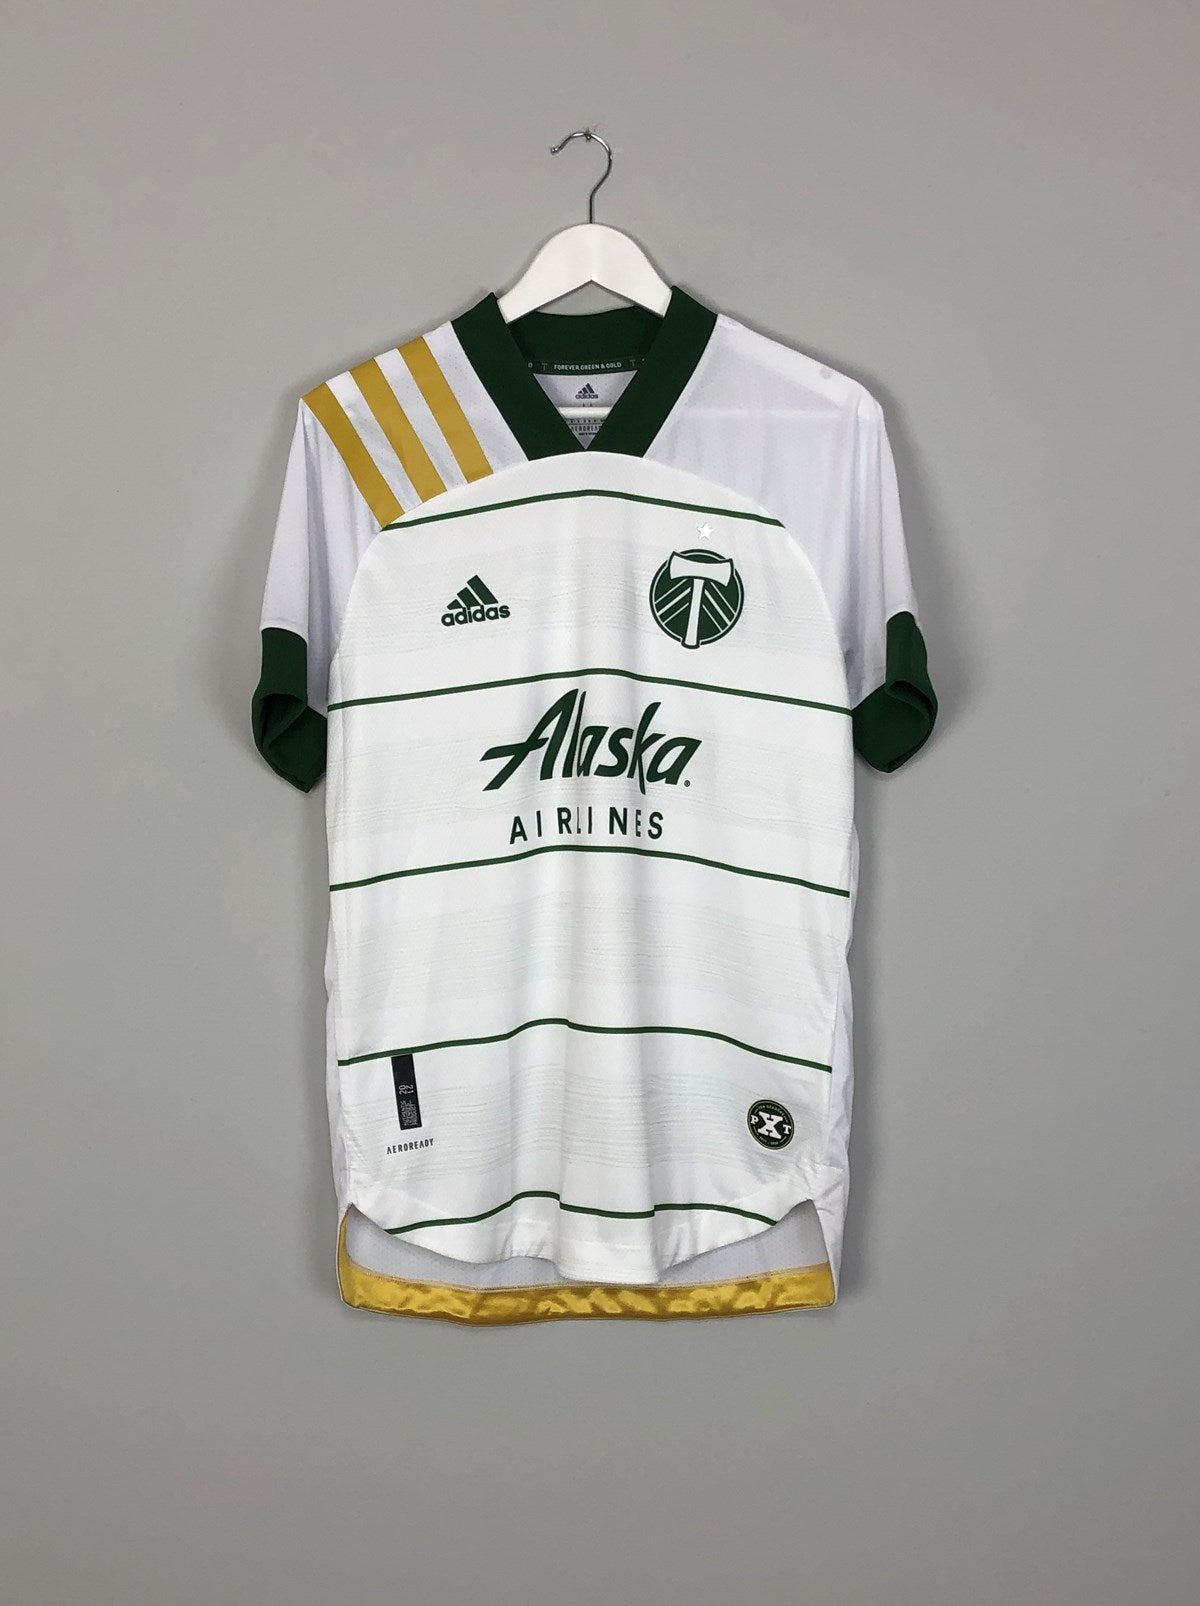 Forever Green & Gold, The 2020 Portland Timbers secondary kit